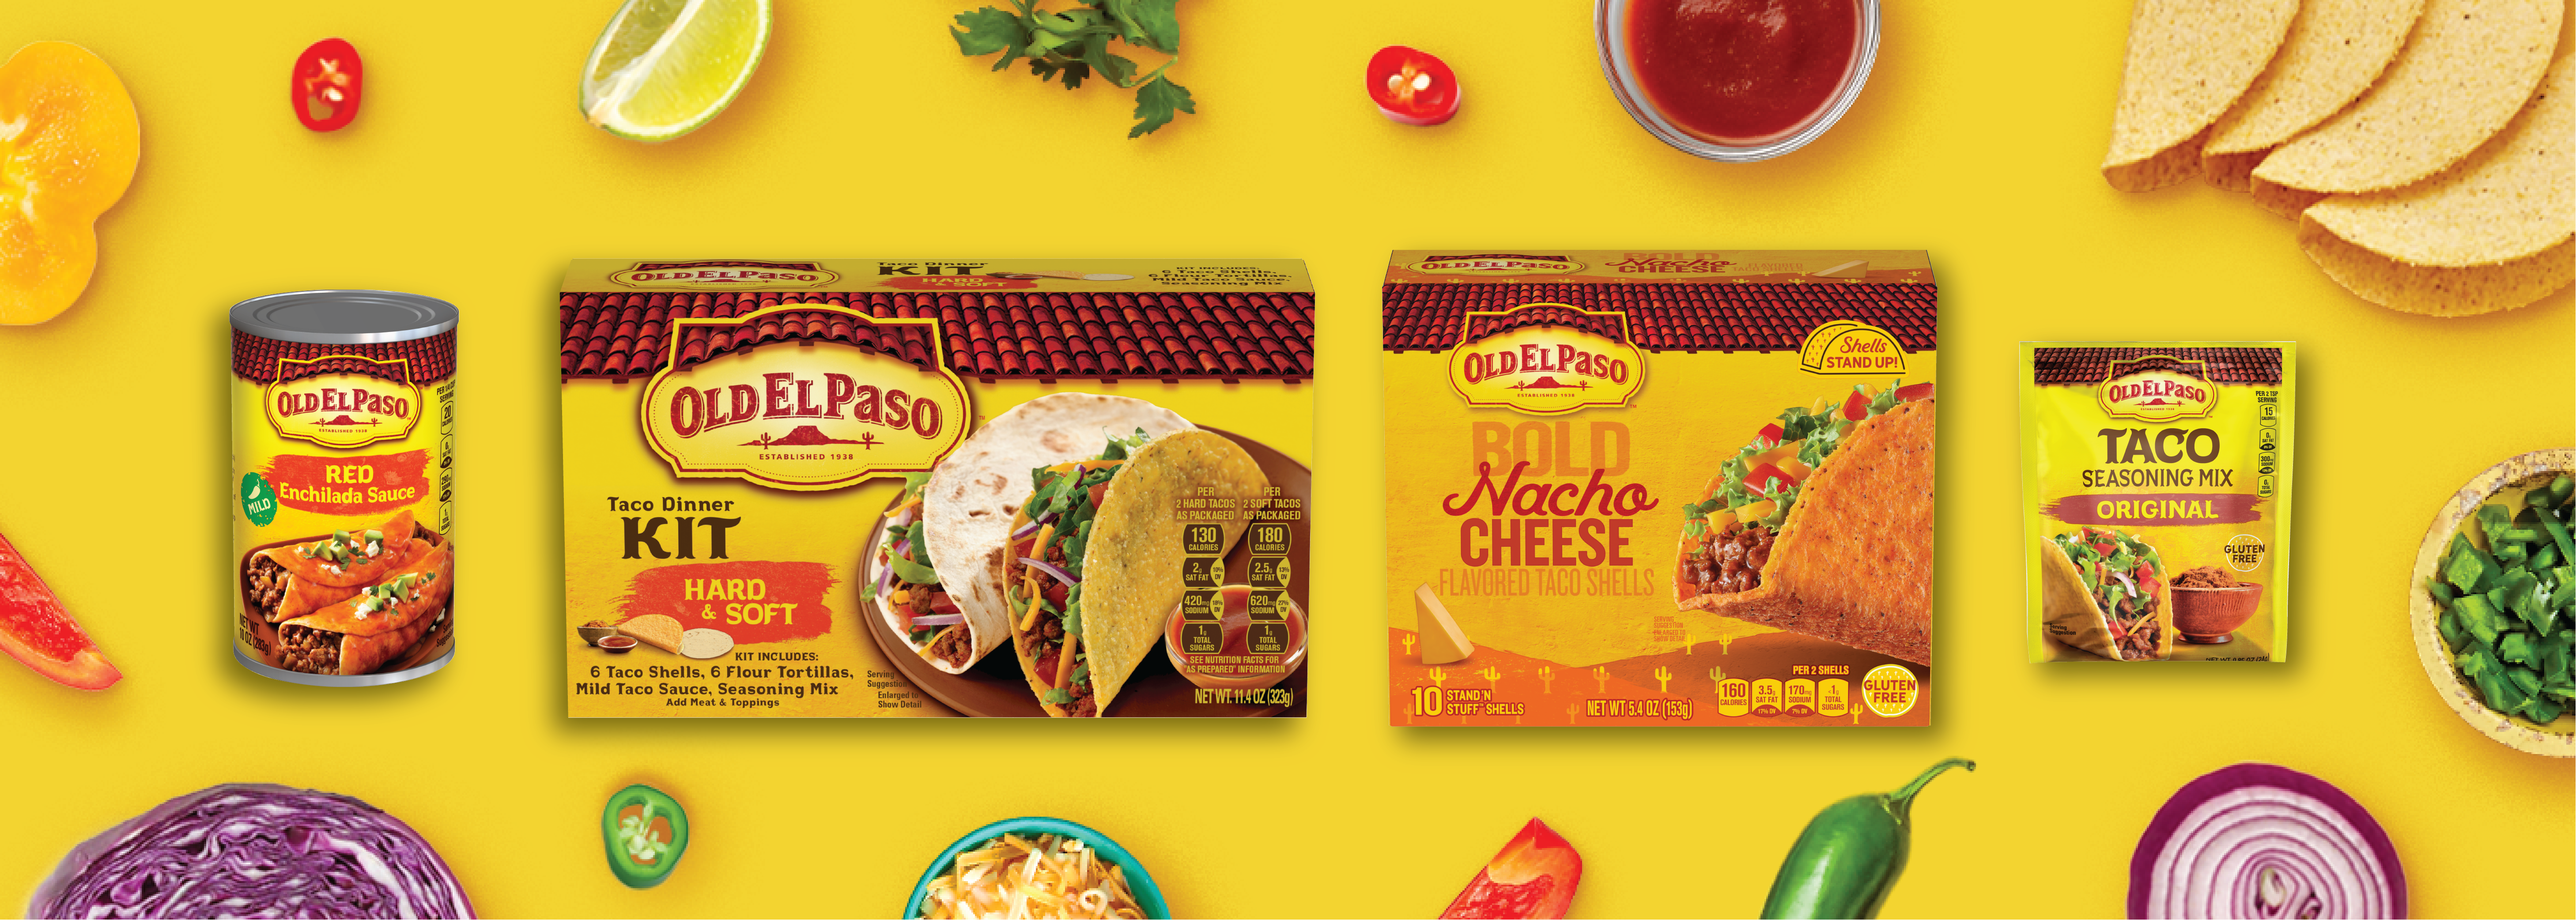 Old El Paso Assorted products including Red Enchilada Sauce, front of can; Taco dinner kit, front of box; Bold Nacho Cheese flavored taco shells, front of box; and original taco seasoning mix, front of package, on a yellow background surrounded by taco ingredients 